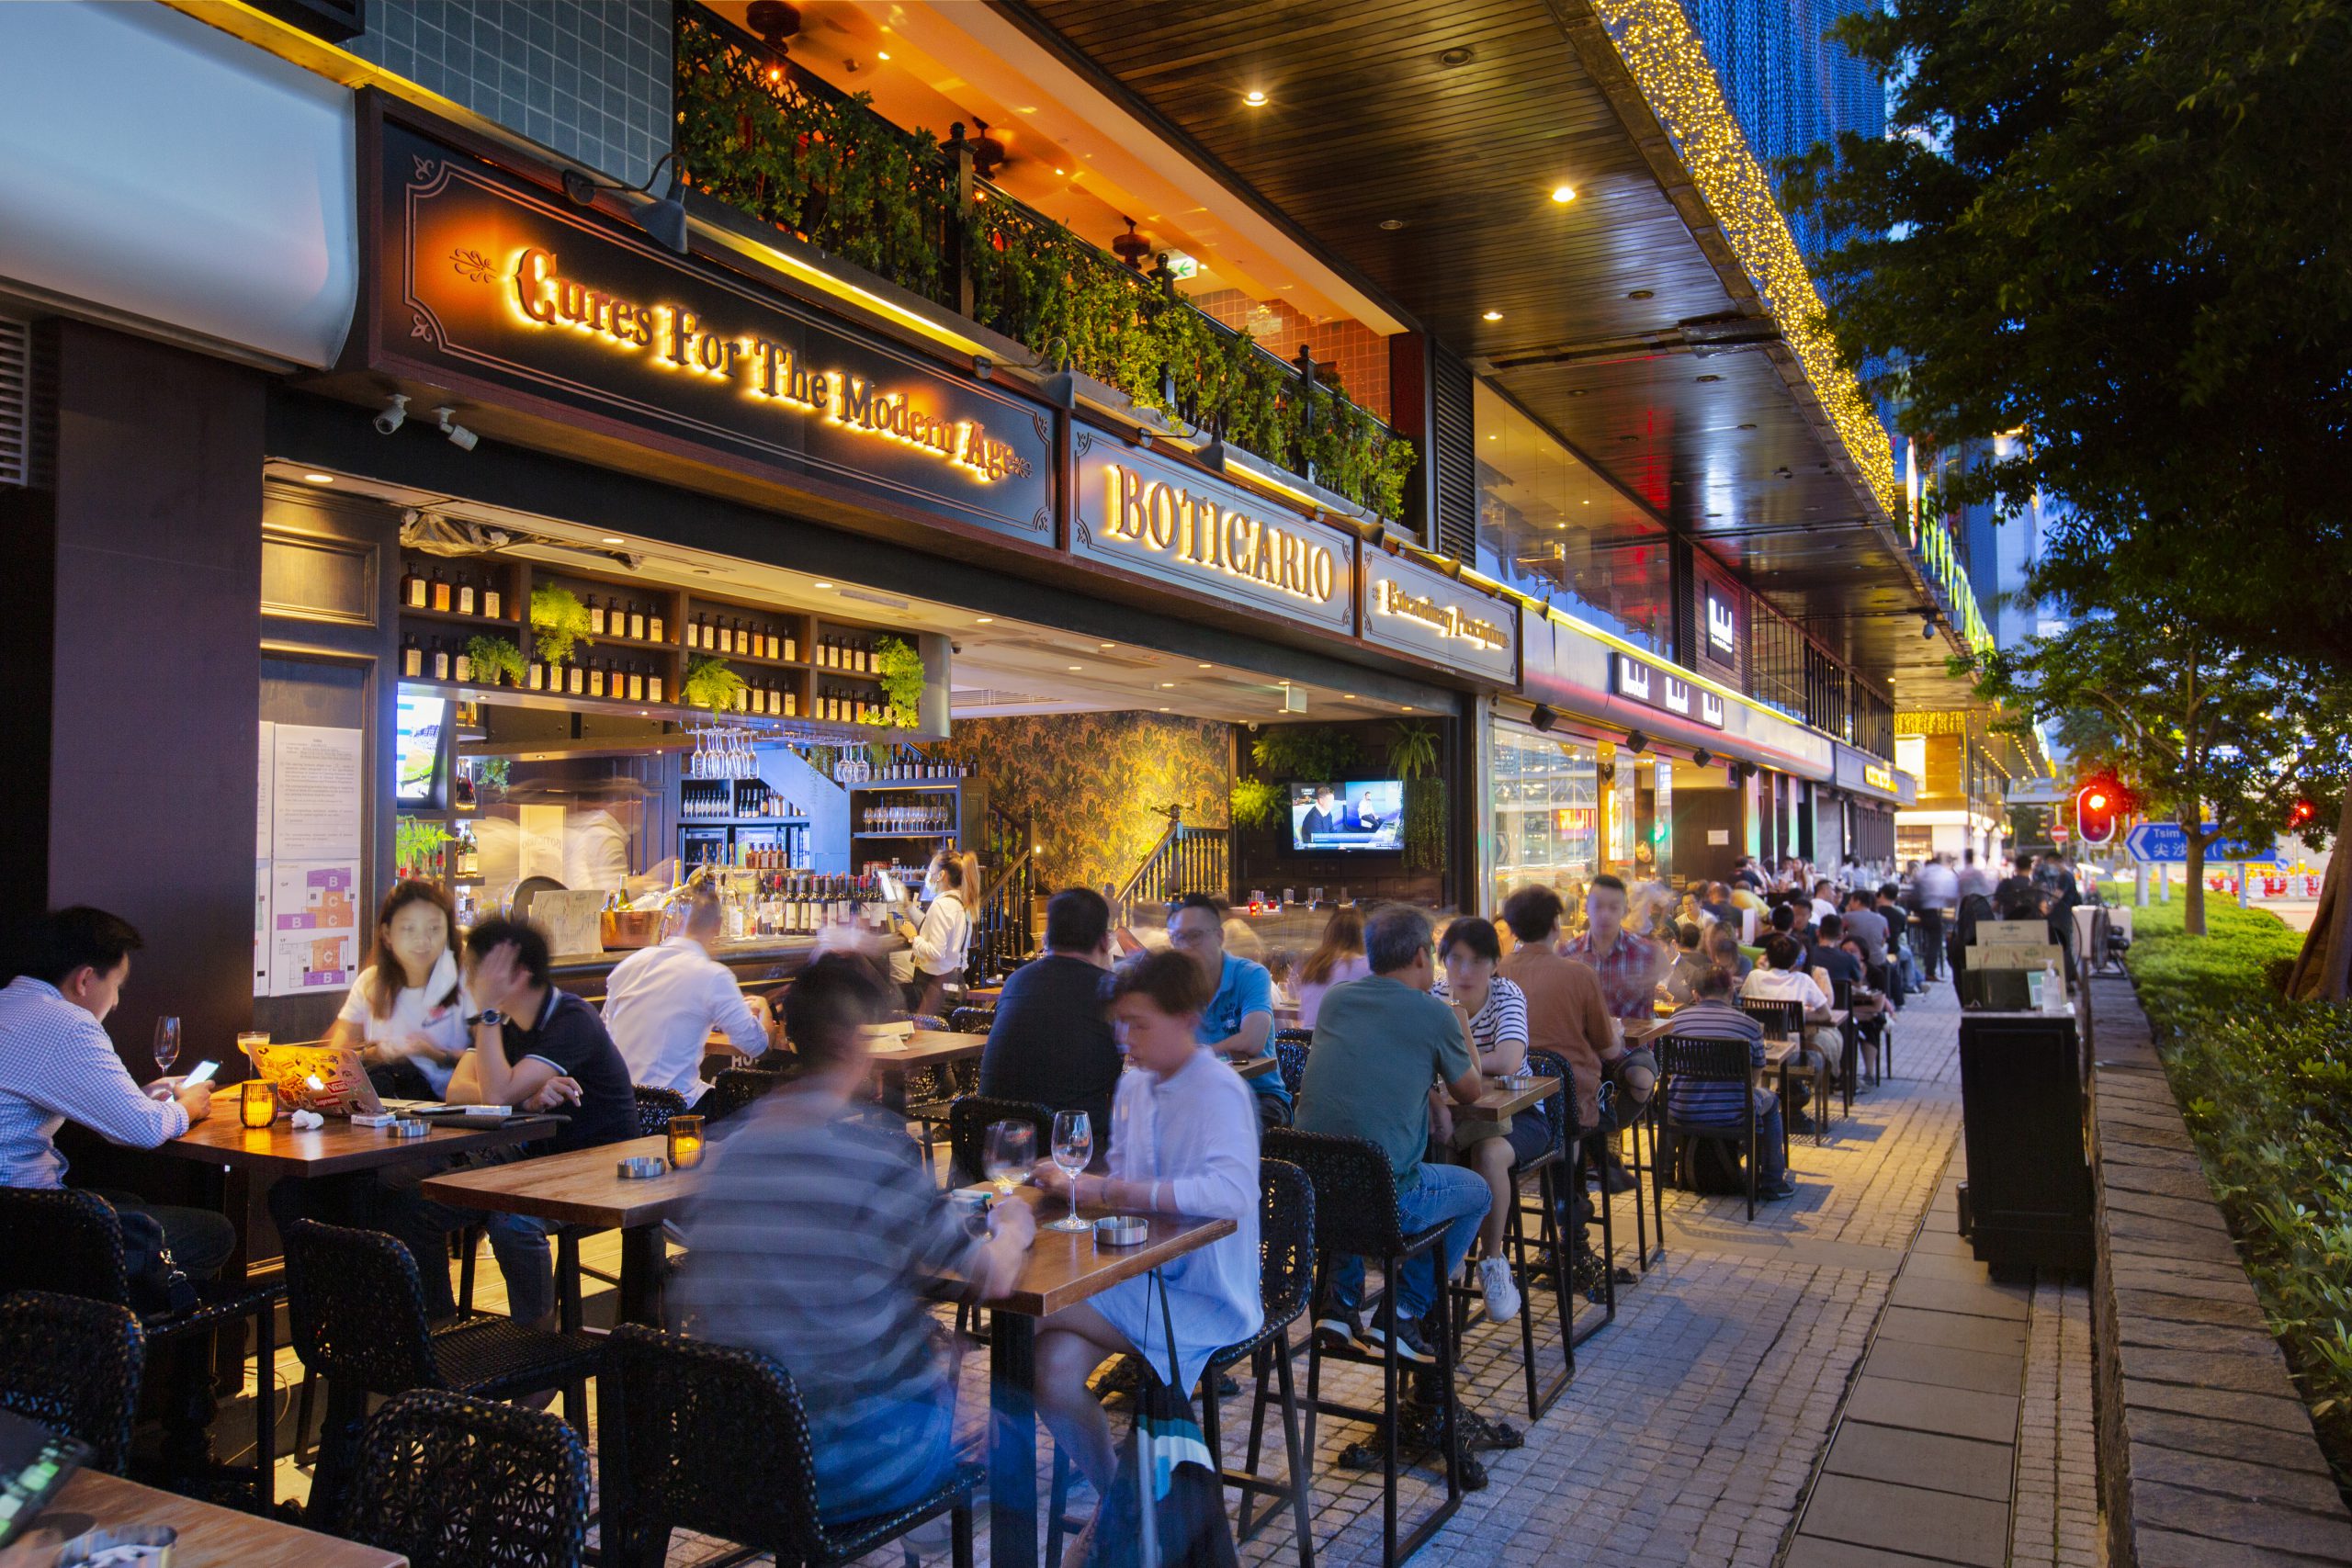 <p>Grab yourself a Happy Hour deal in Alfresco Lane’s bars and restaurants.</p>
